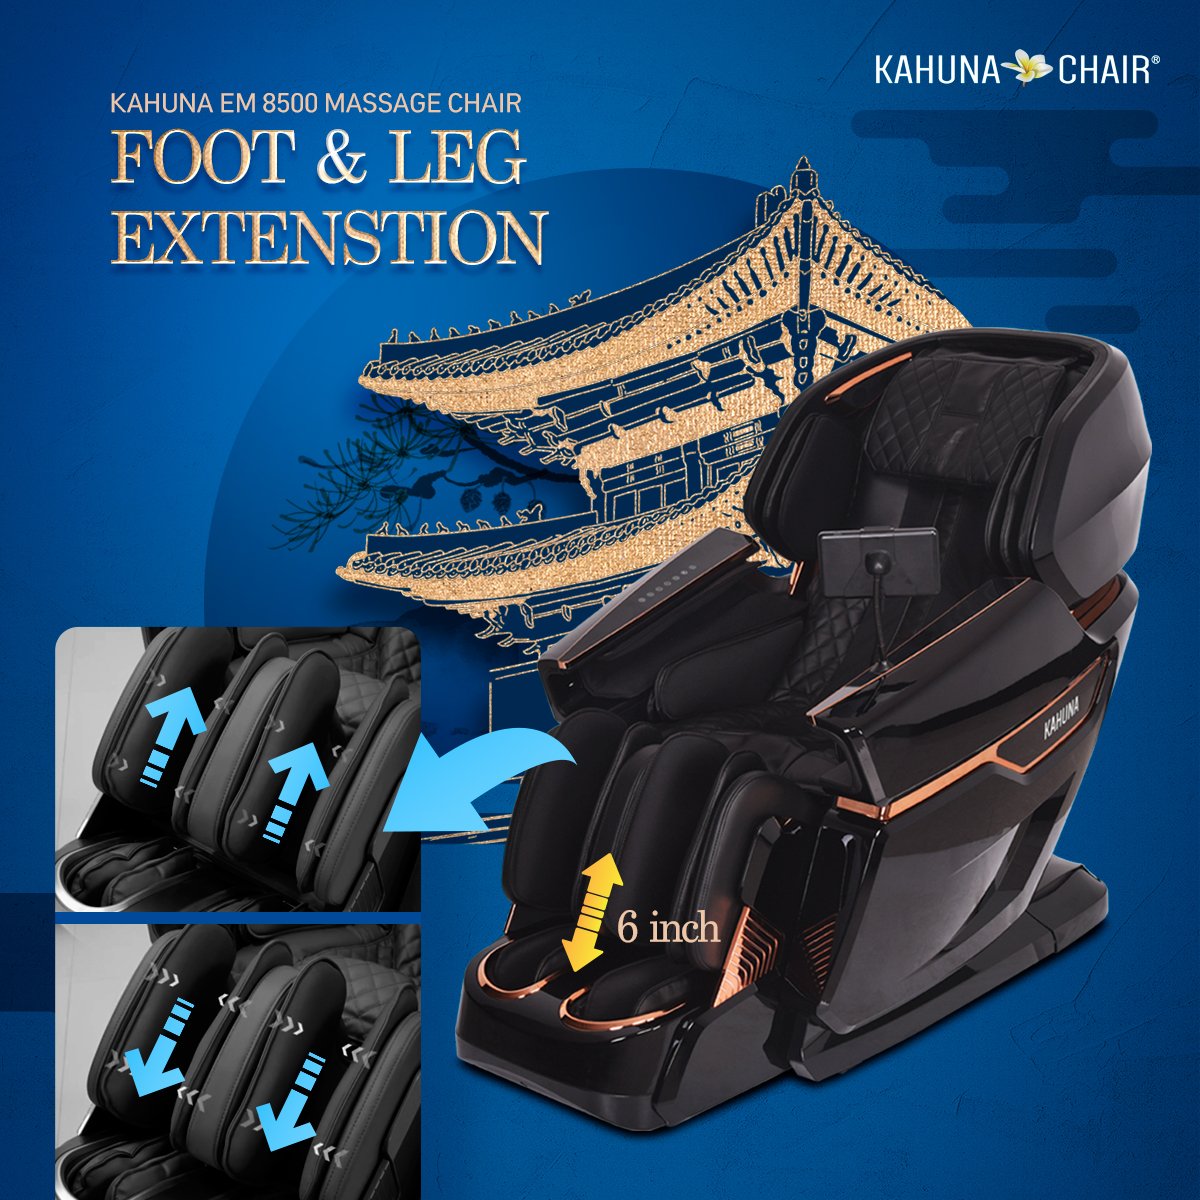 kahuna em8500 Foot and legs extension massage chair